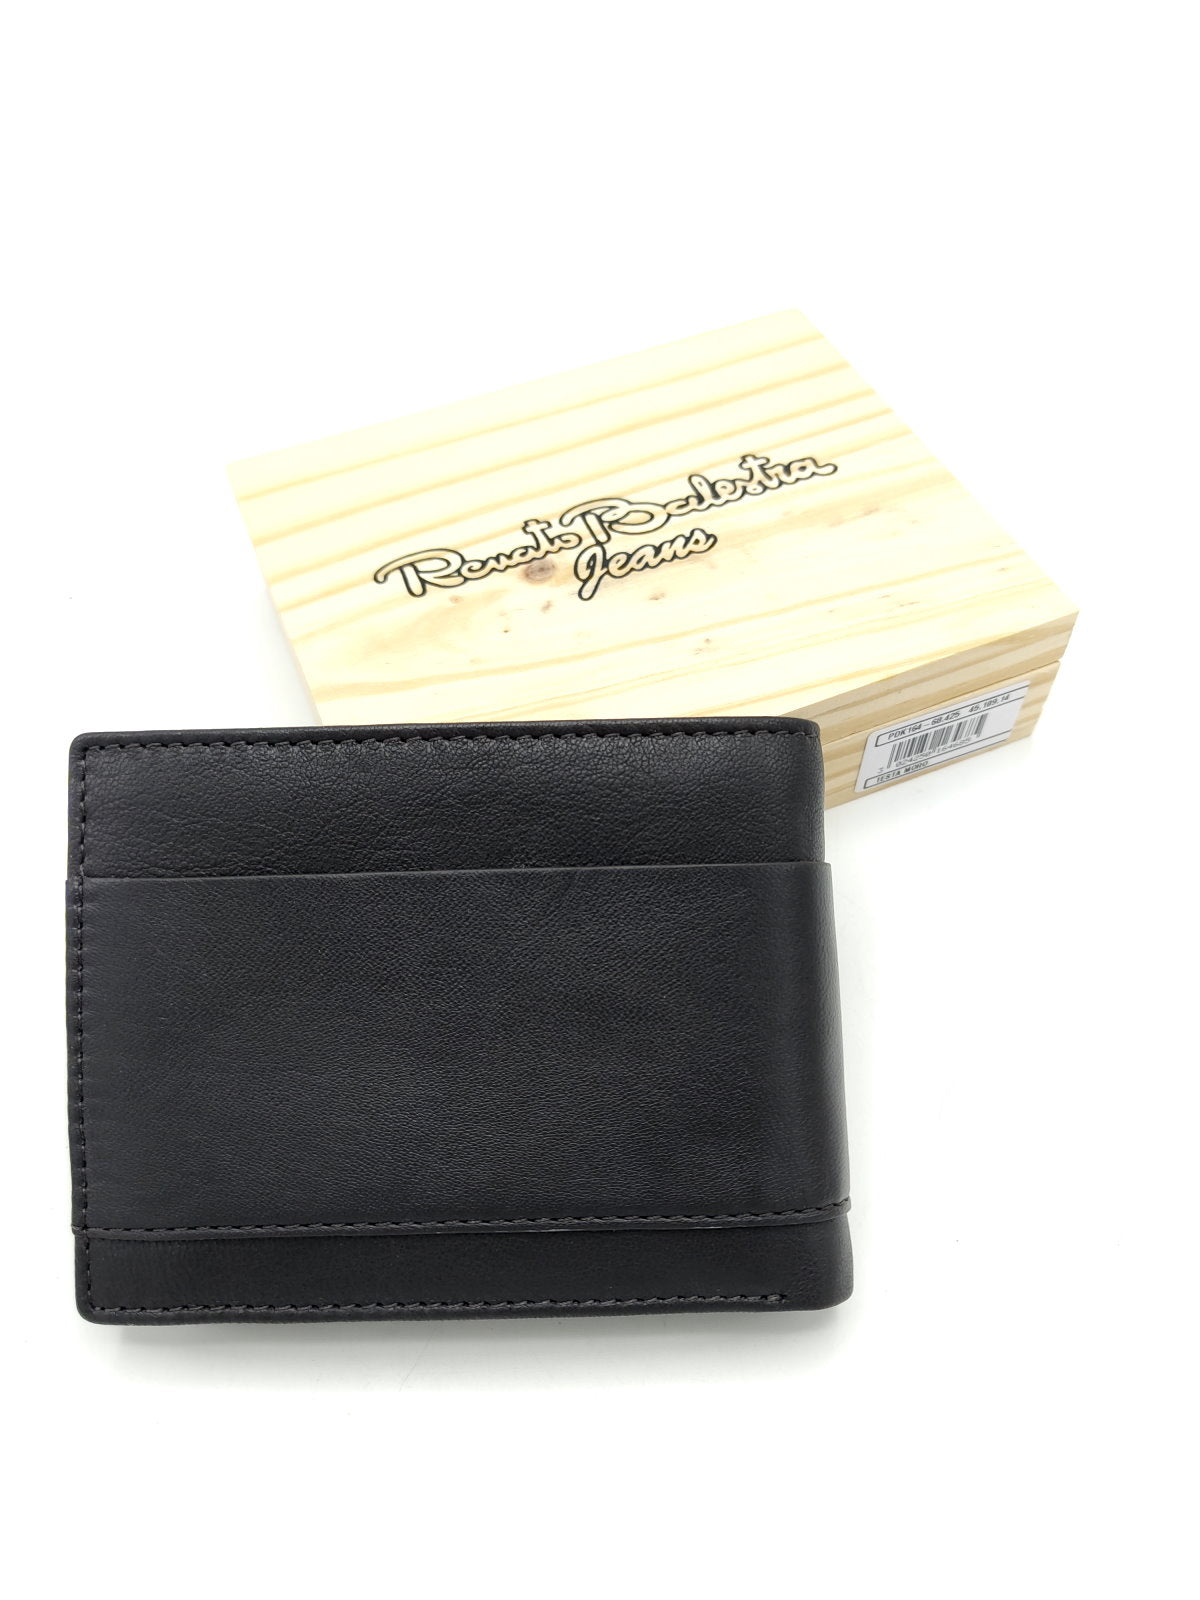 Genuine leather wallet for Men, Brand Renato Balestra Jeans, with wooden box, art. PDK164-68.425